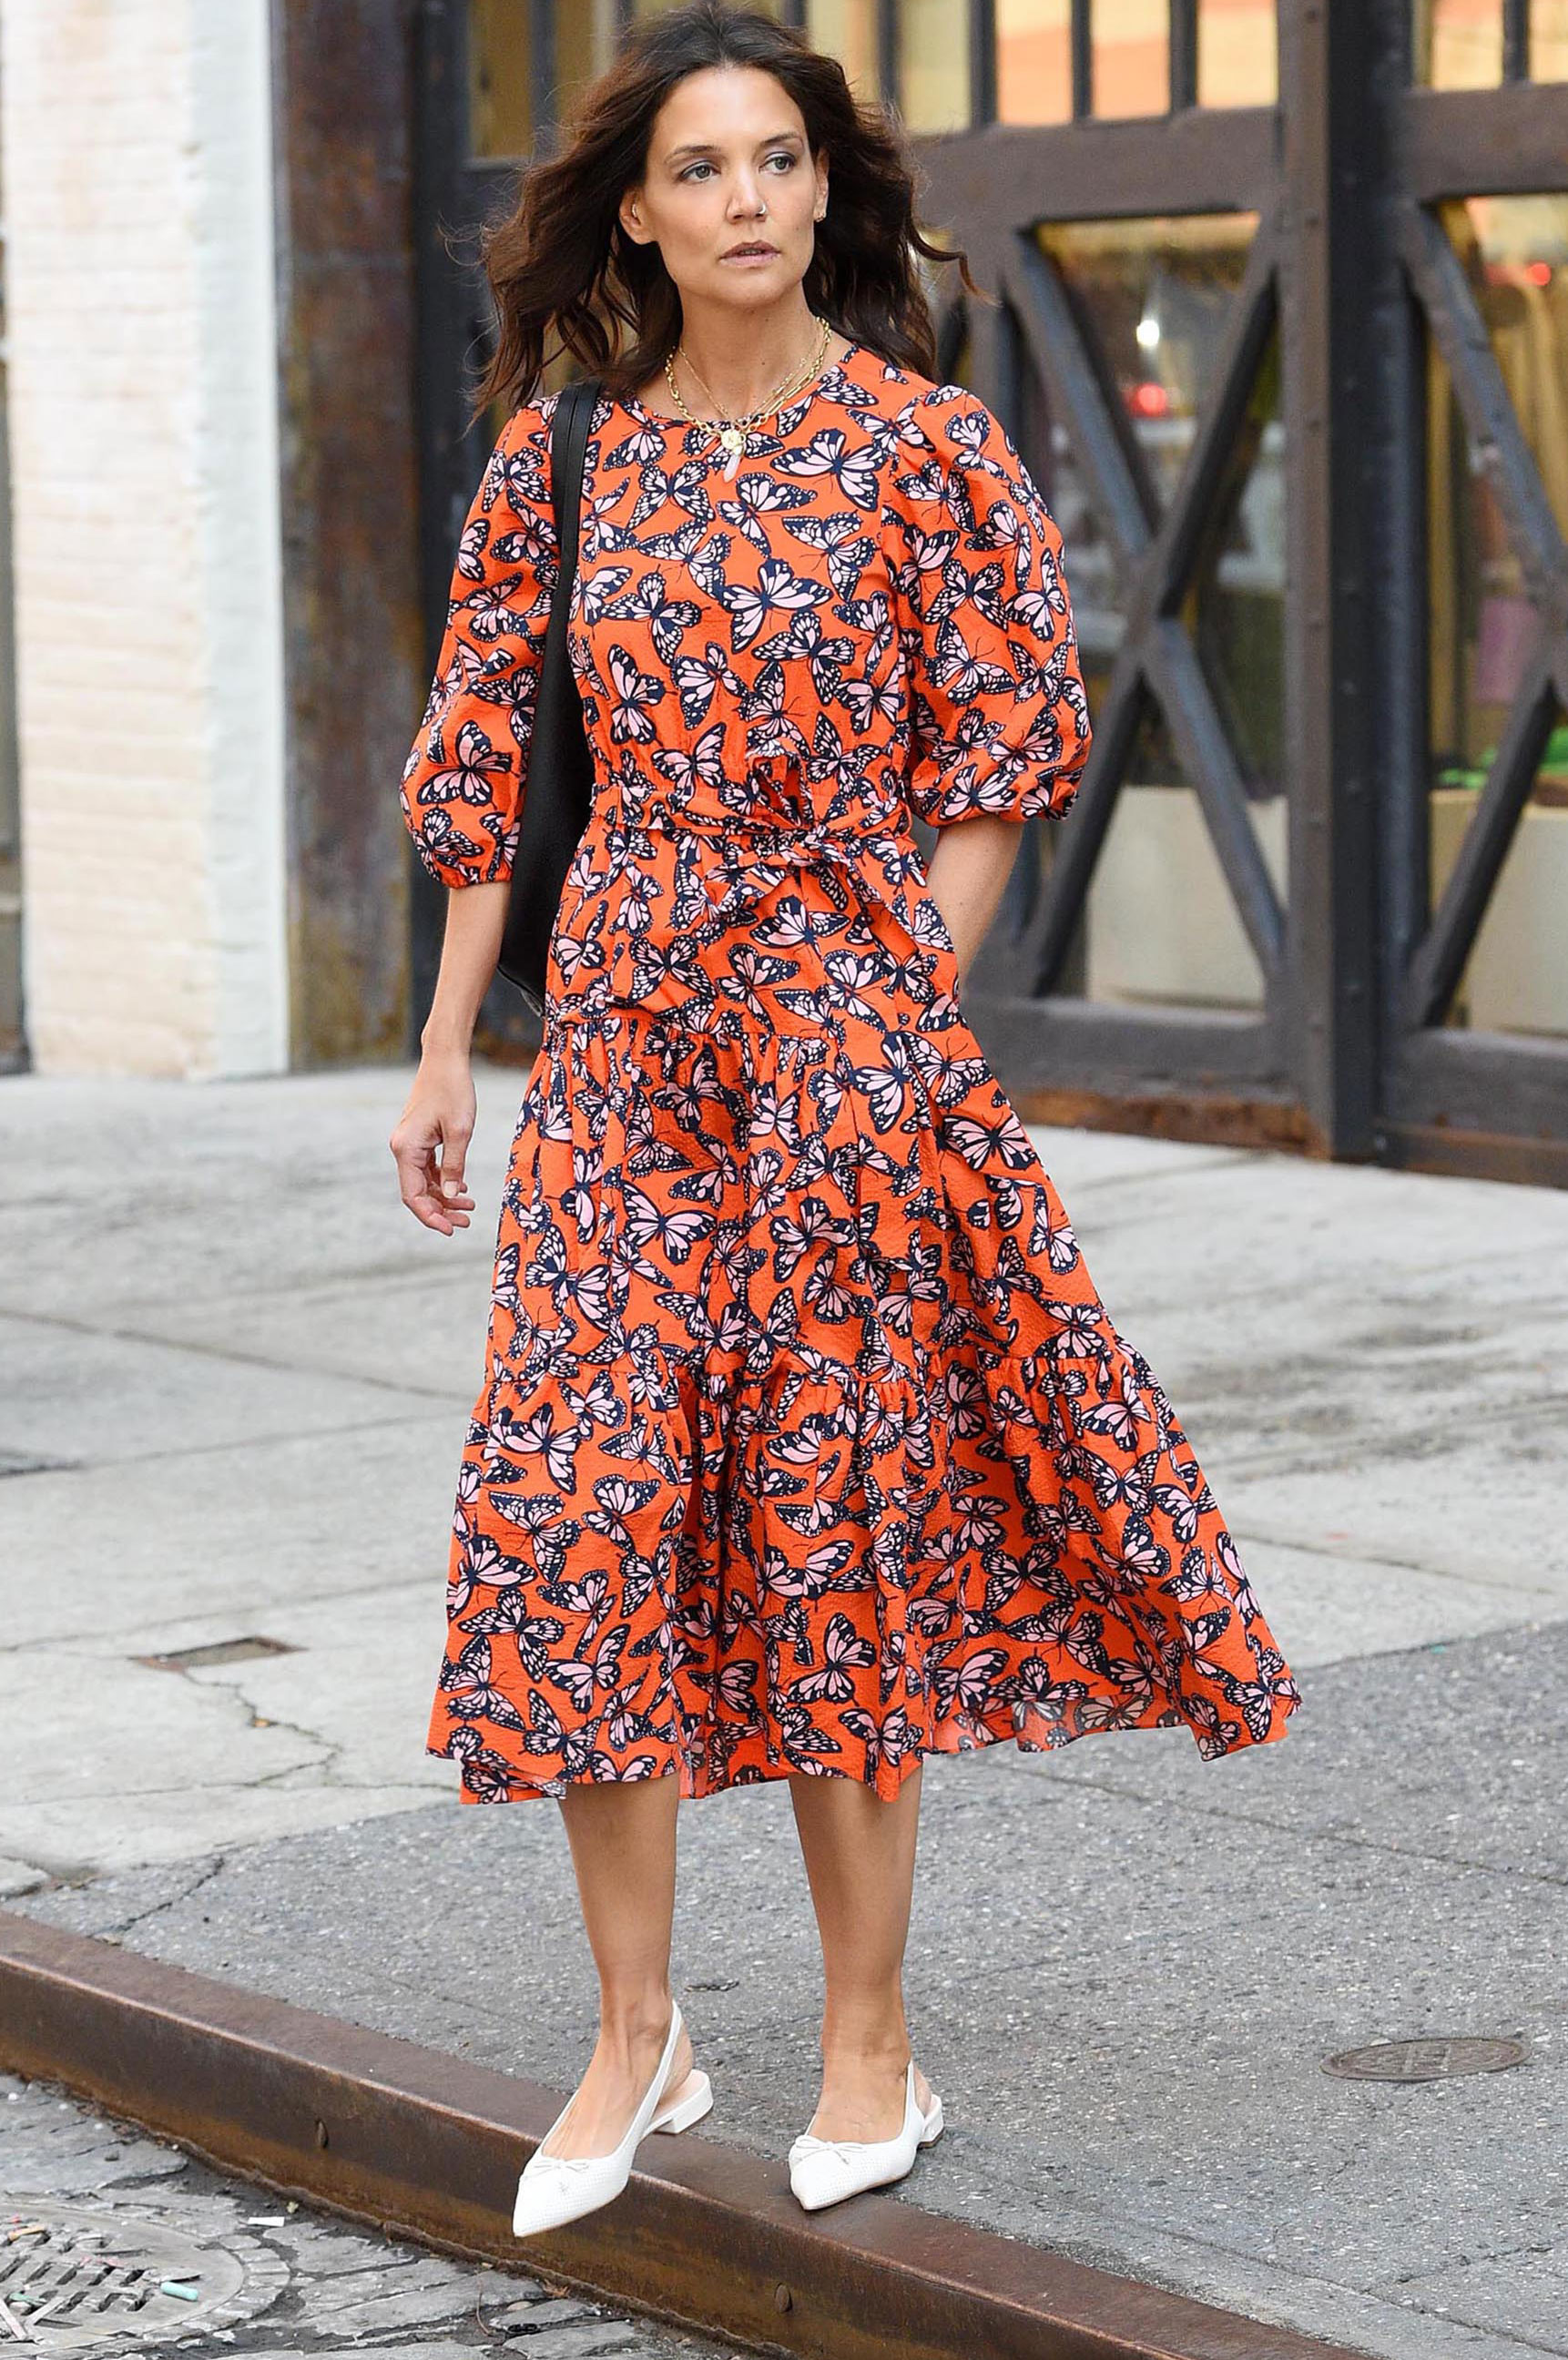 Katie Holmes Just Wore the Flat Shoes French Women Live In